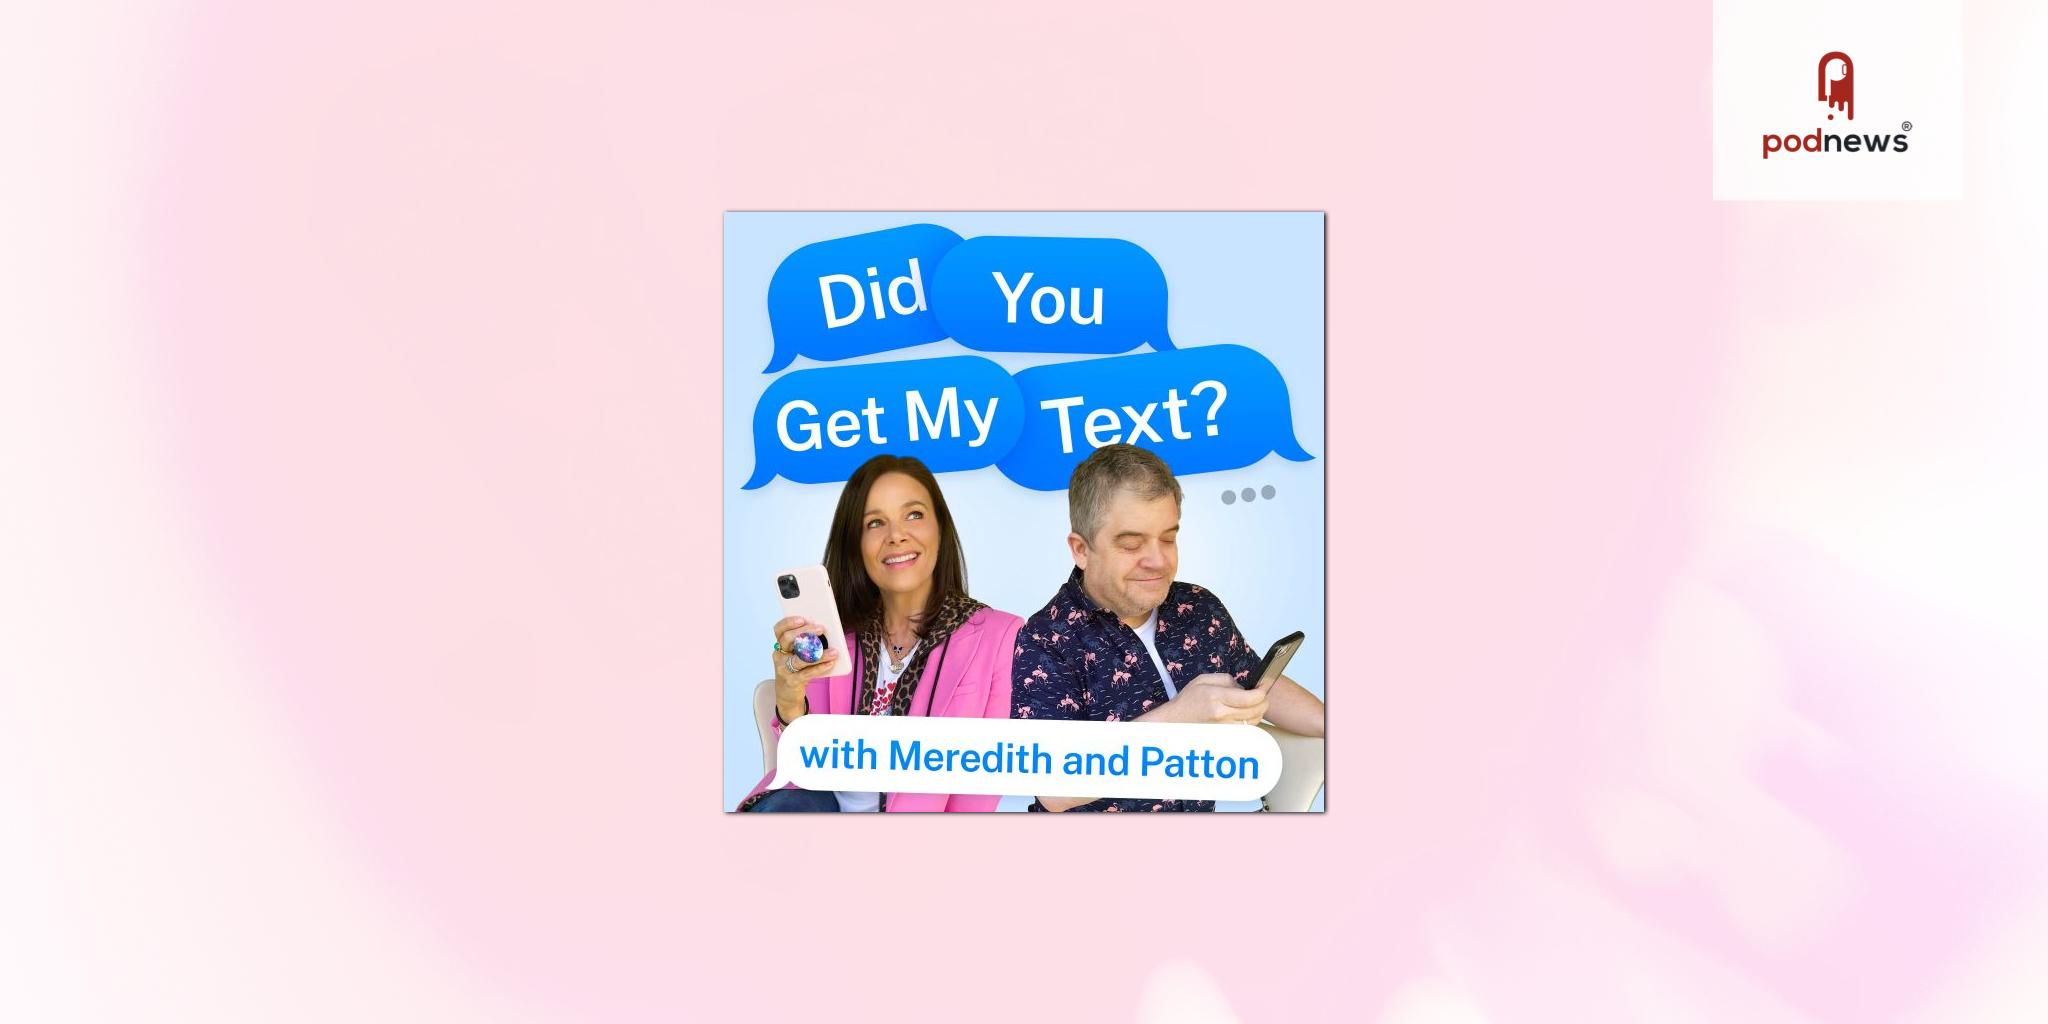 Patton Oswalt and Meredith Salenger bring you into their text messages with Did You Get My Text?